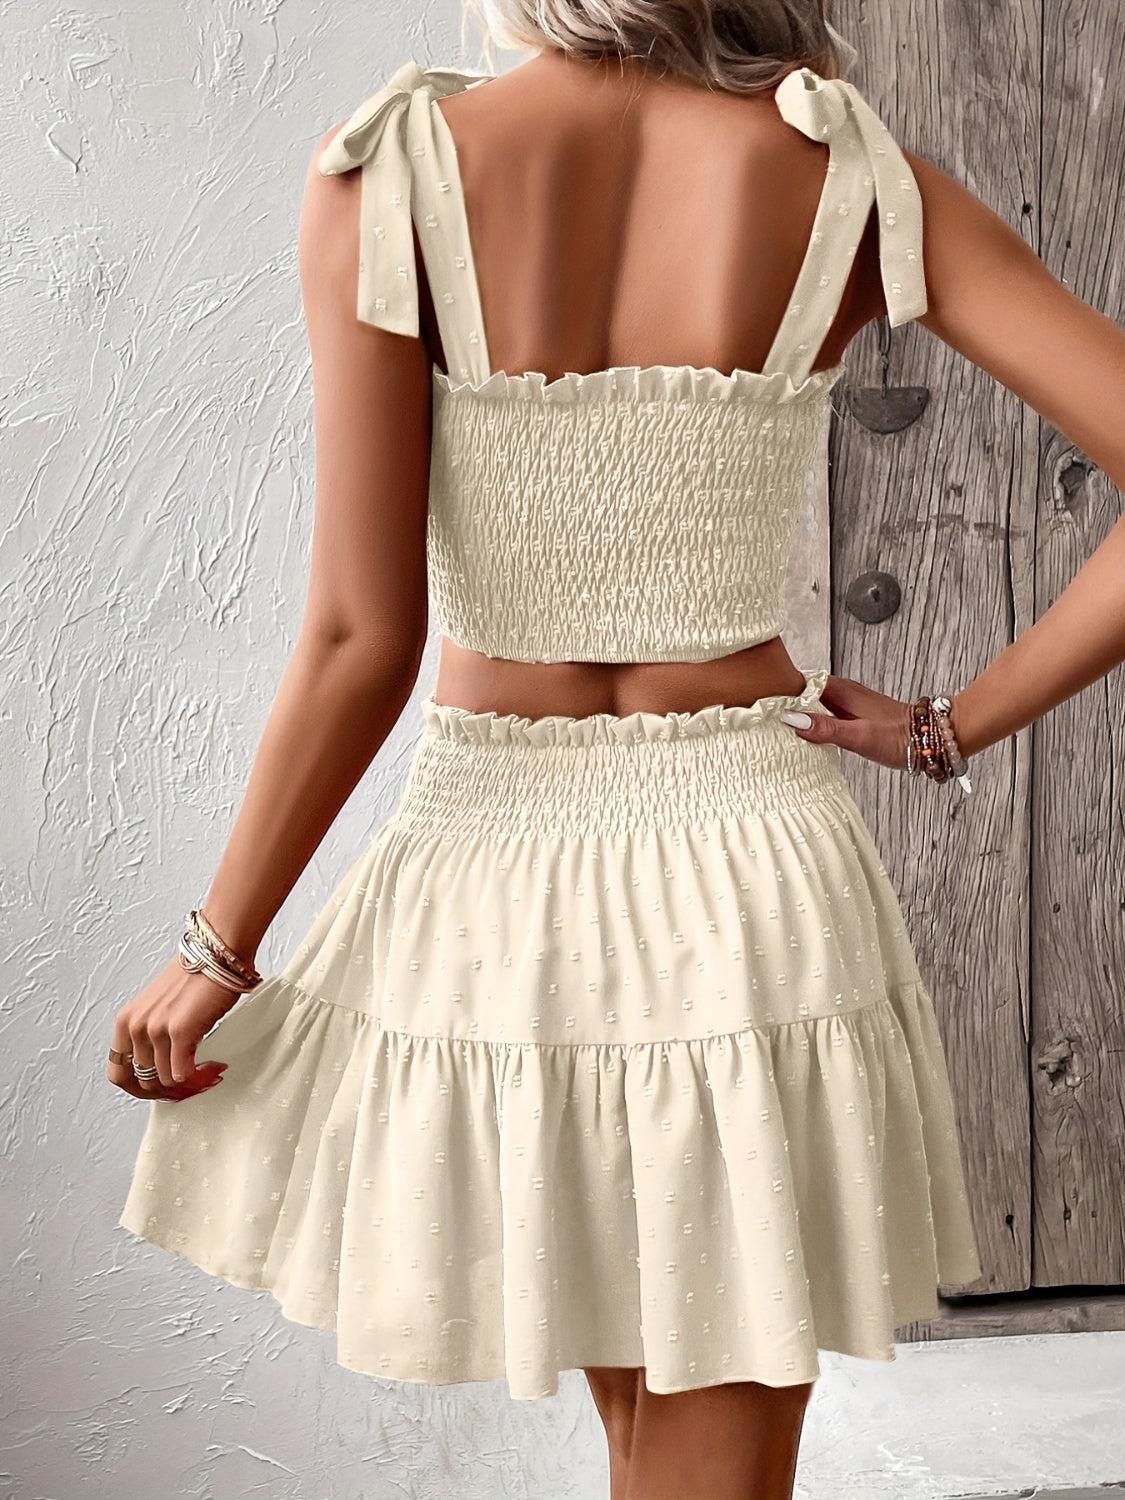 the back of a woman wearing a white dress